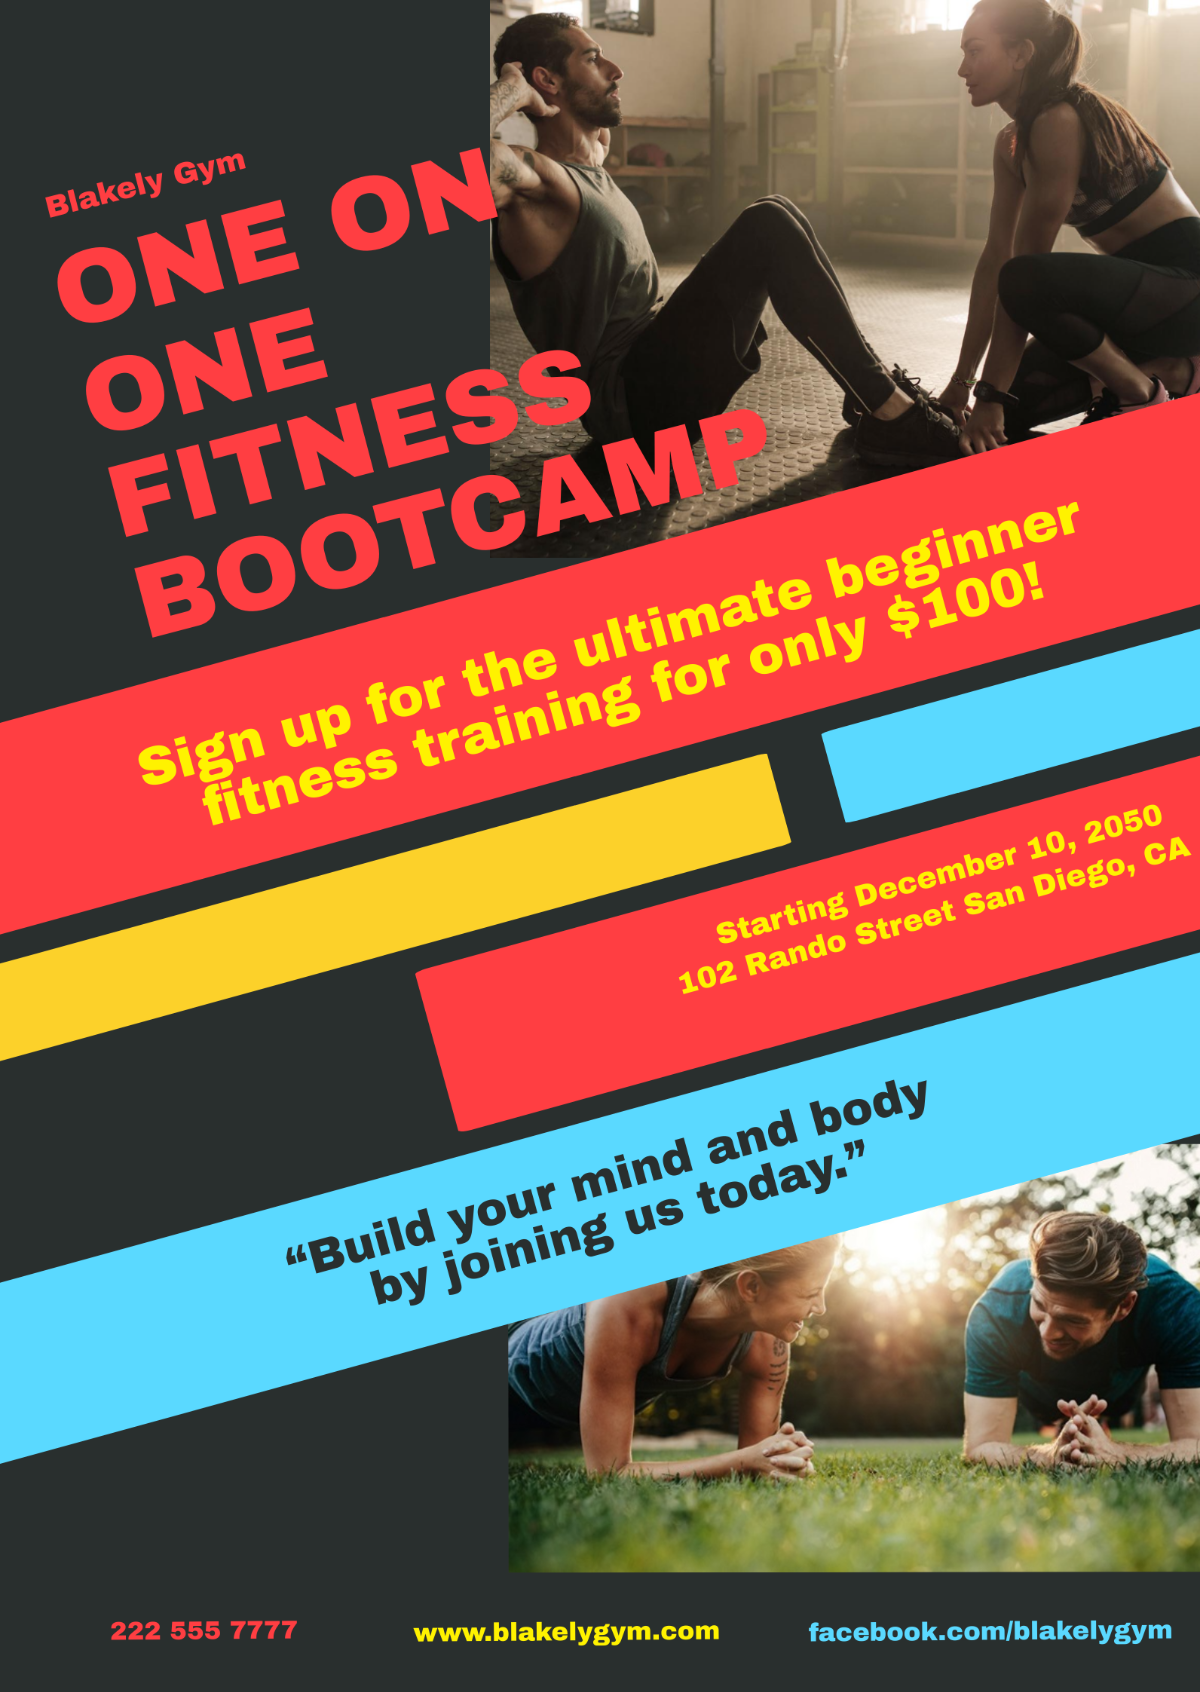 Personal Training Boot Camp Flyer